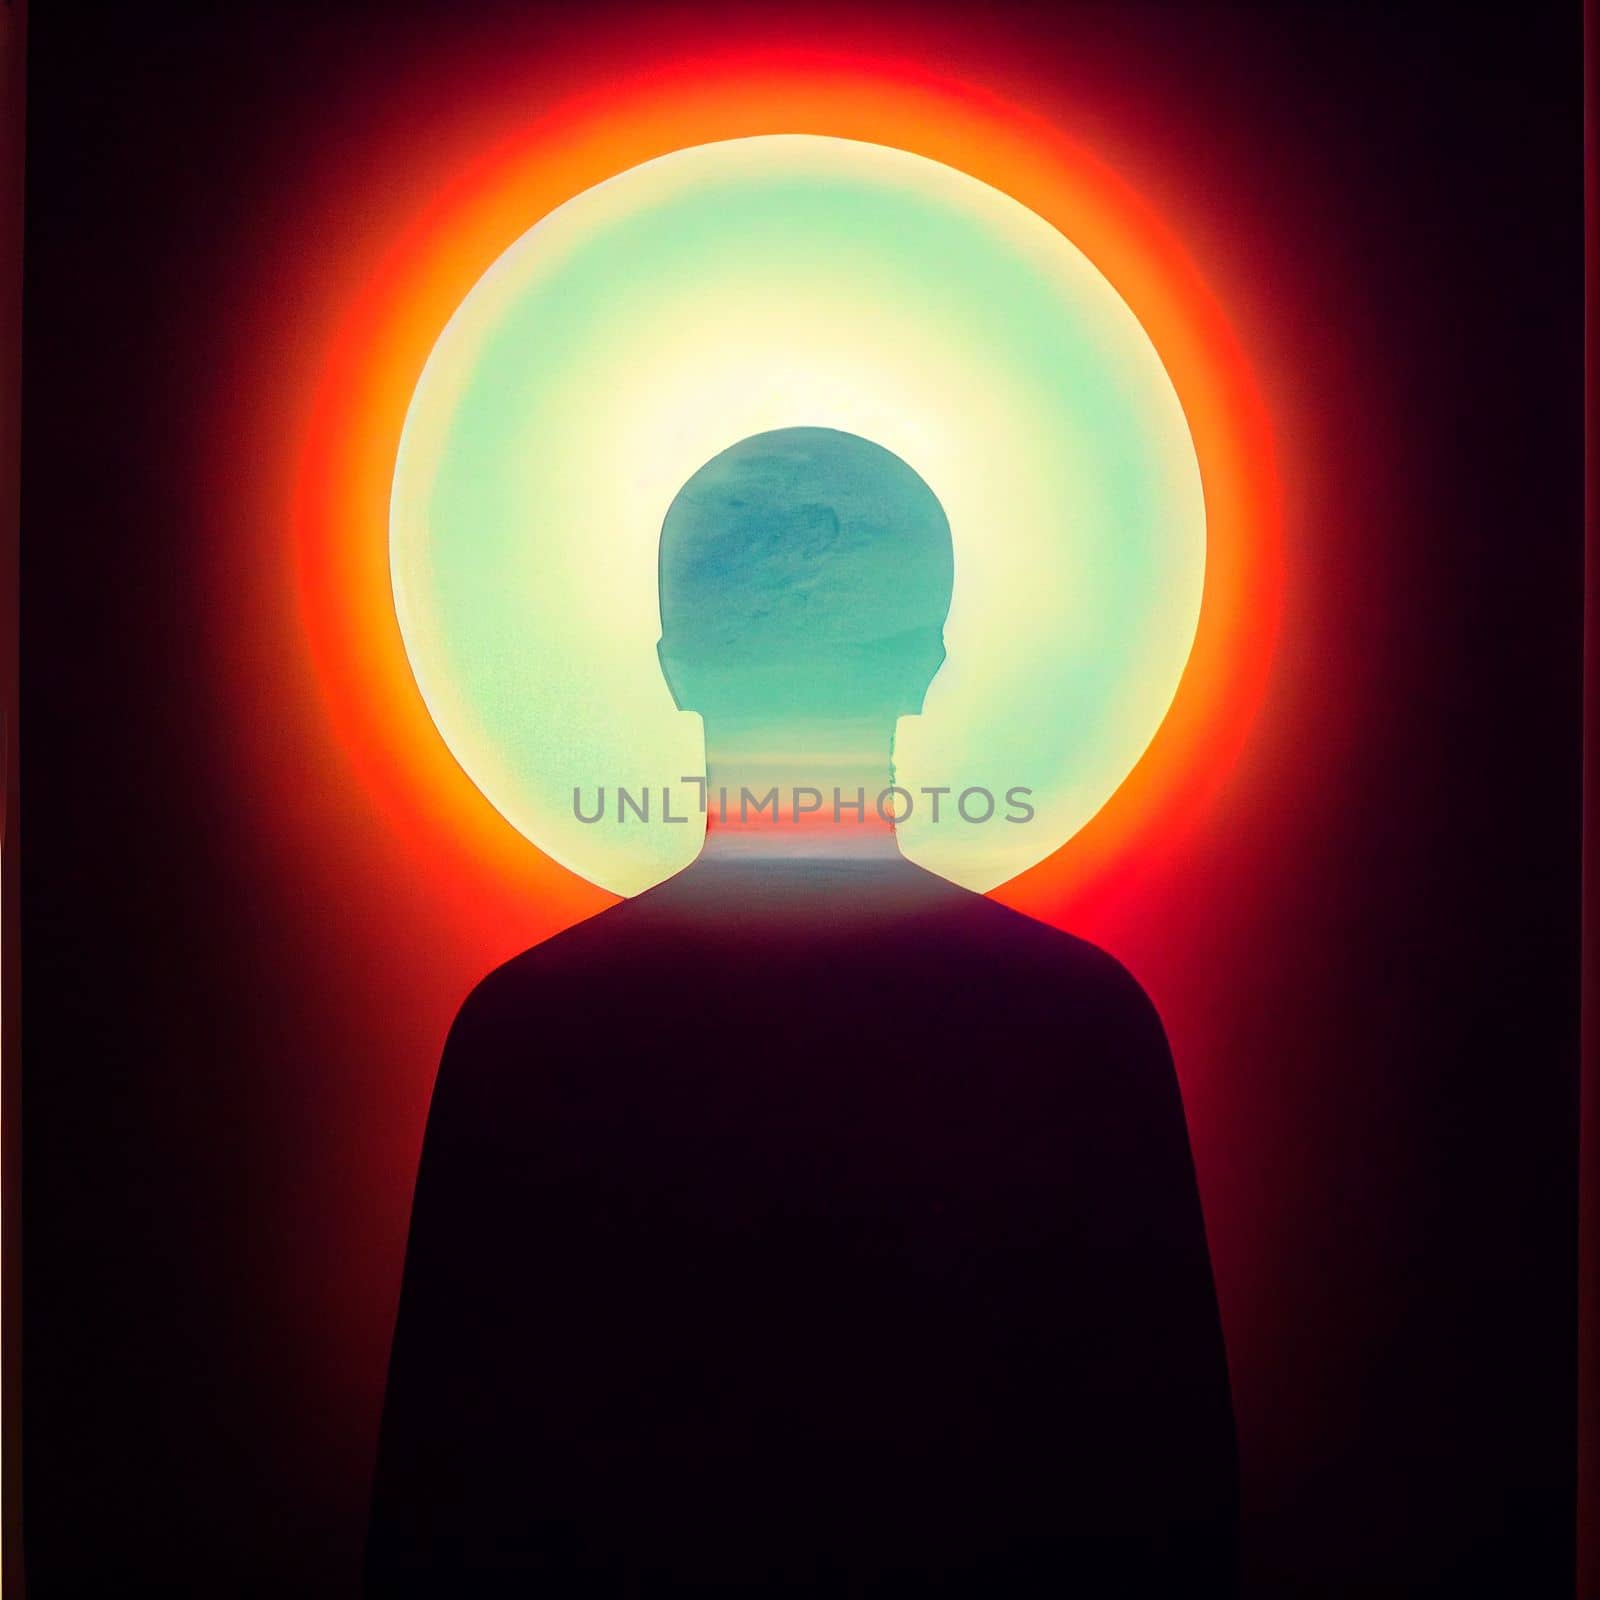 Abstract image of a human silhouette by NeuroSky